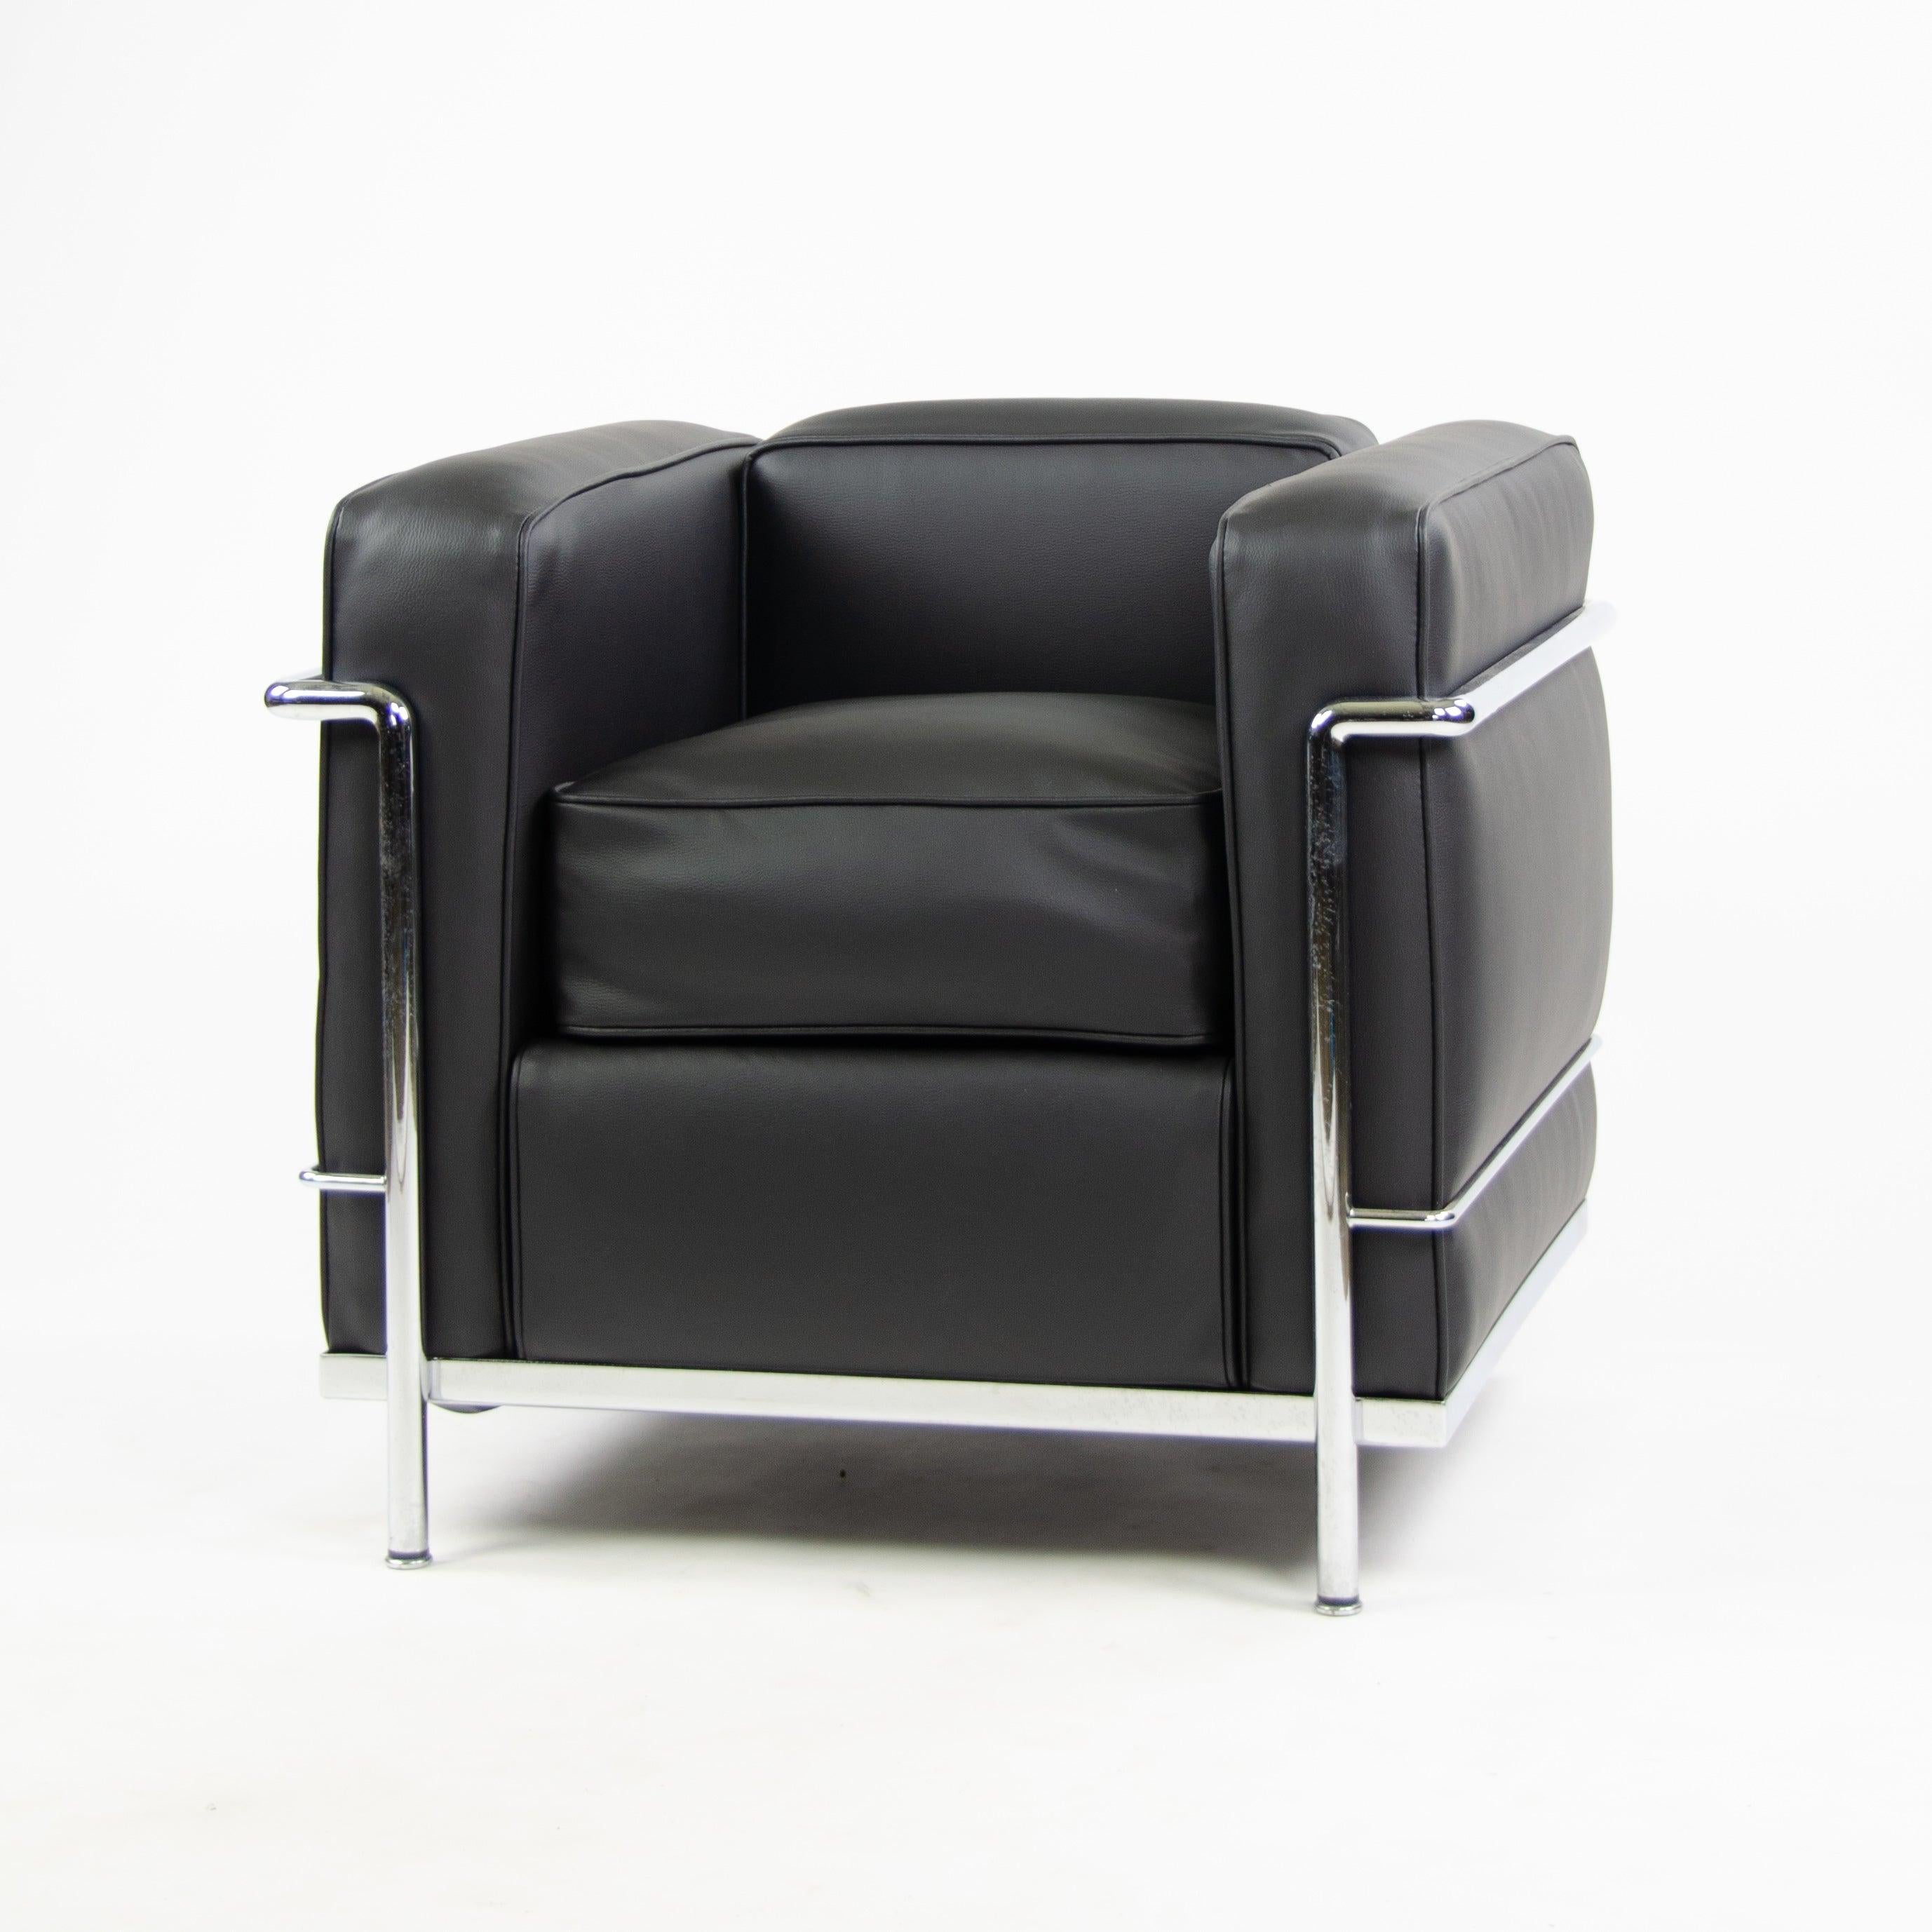 Listed for sale is a beautiful and original LC2 Petit Modele armchair by Cassina with new and gorgeous black upholstery. This series was designed most famously by Le Corbusier, along with his collaborators Pierre Jeanneret and Charlotte